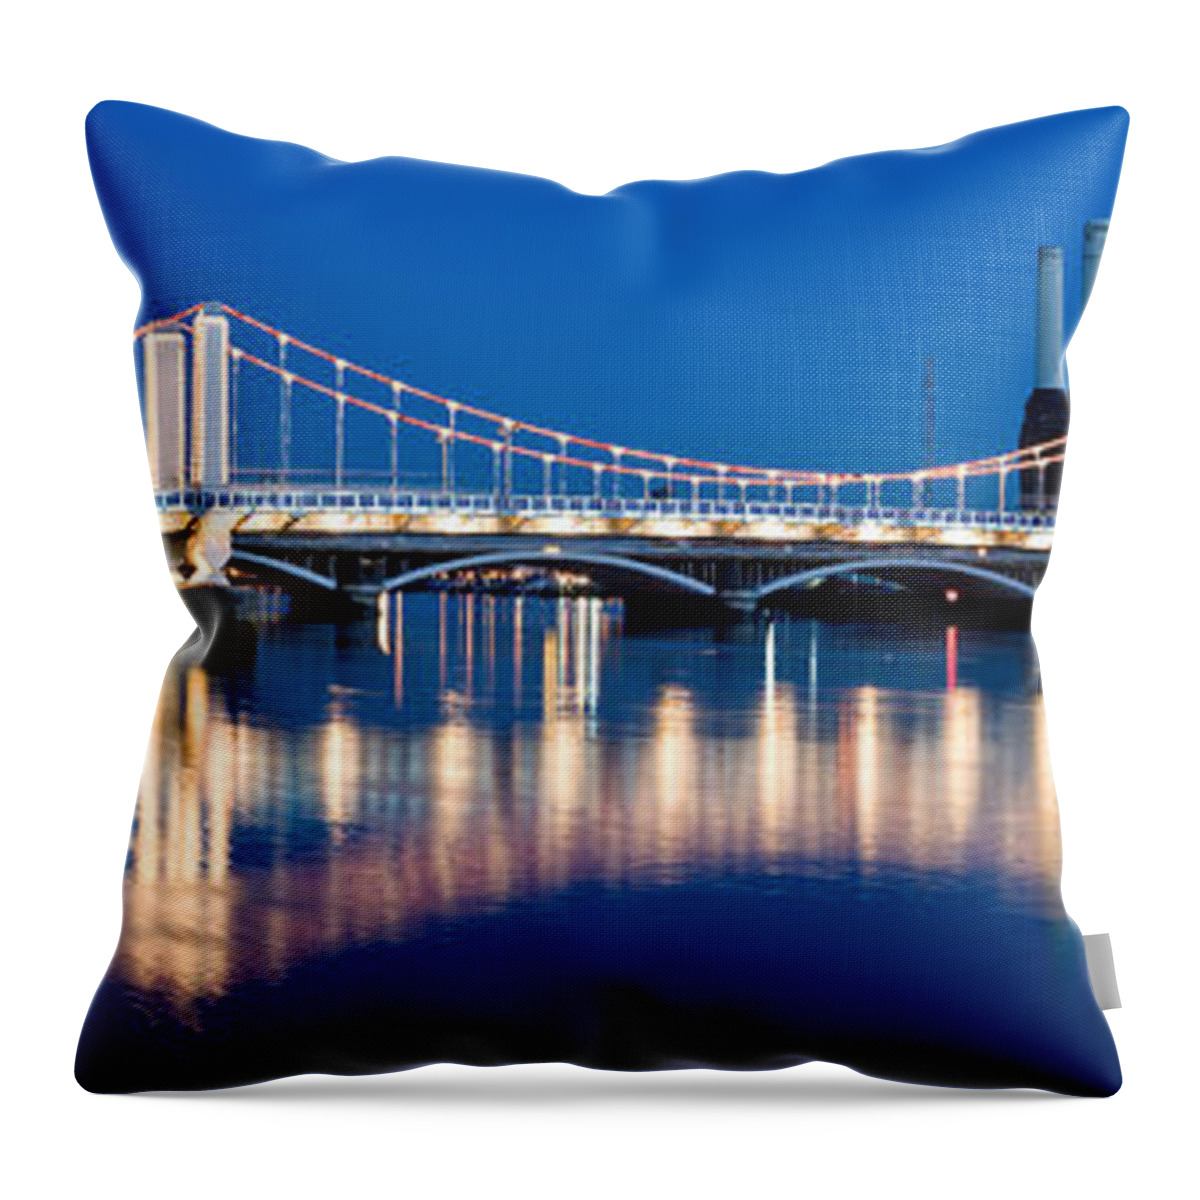 Photography Throw Pillow featuring the photograph Chelsea Bridge With Battersea Power by Panoramic Images